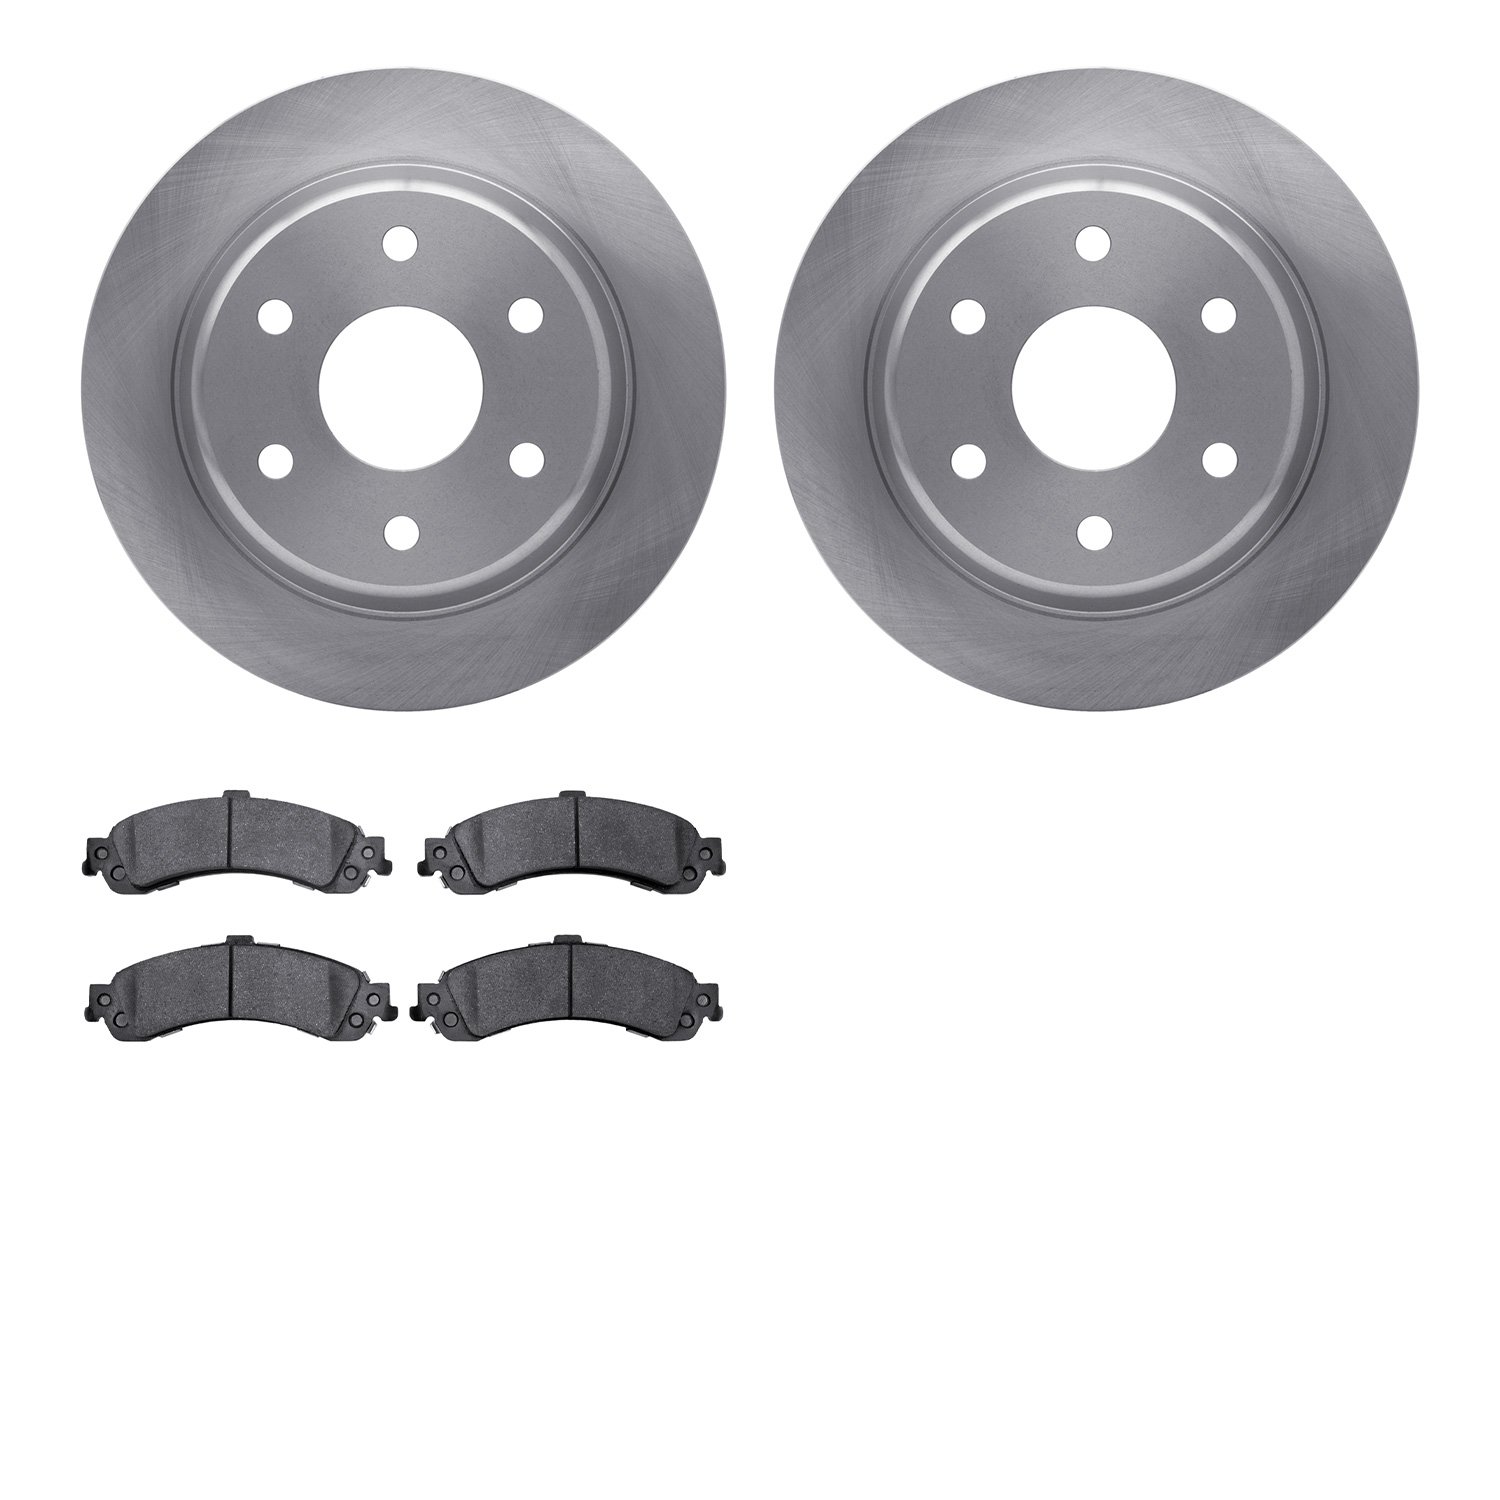 6402-48079 Brake Rotors with Ultimate-Duty Brake Pads, 2000-2006 GM, Position: Rear